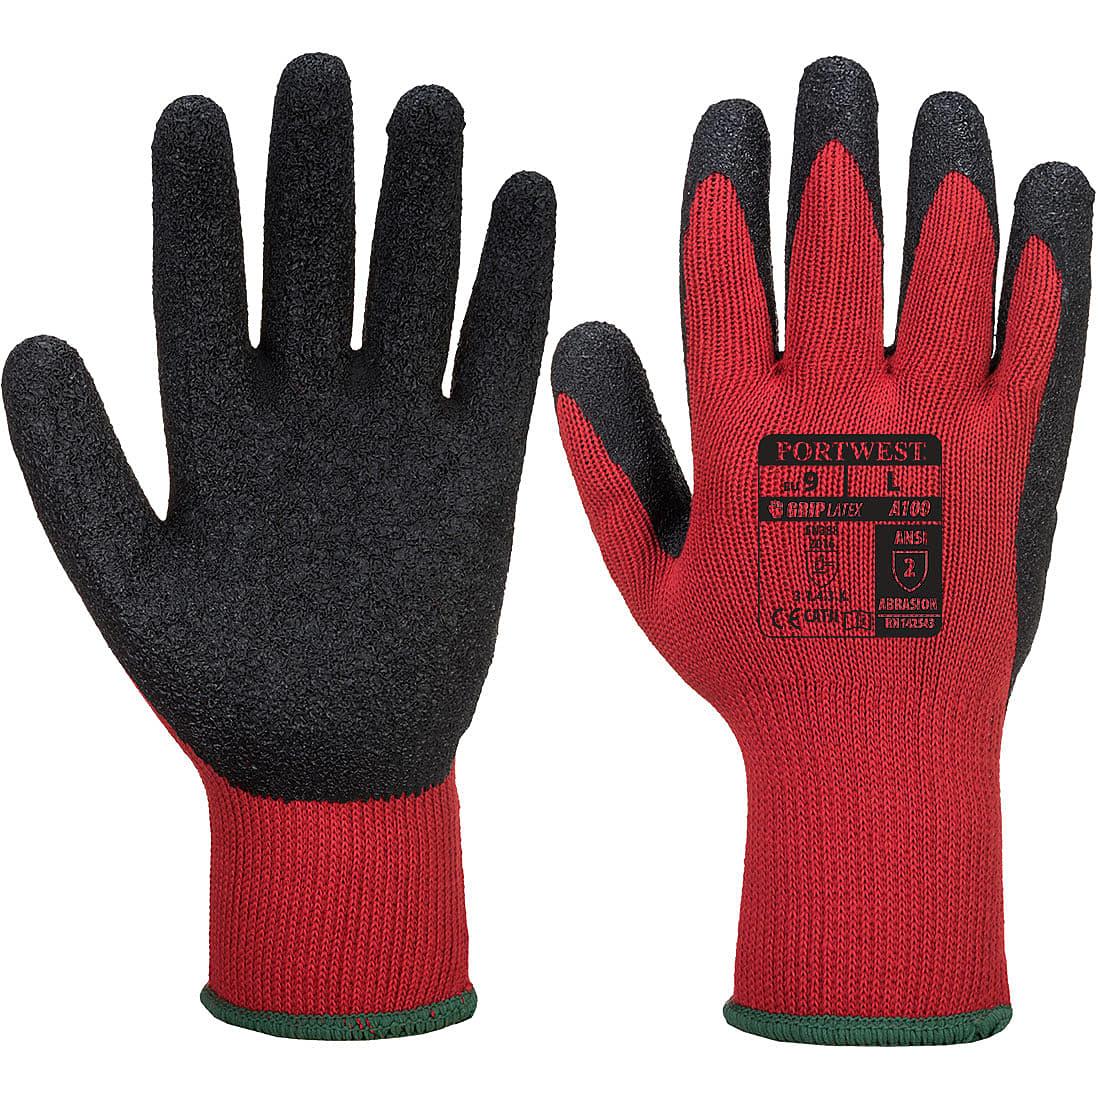 Portwest Grip Gloves - Latex in Red / Black (Product Code: A100)